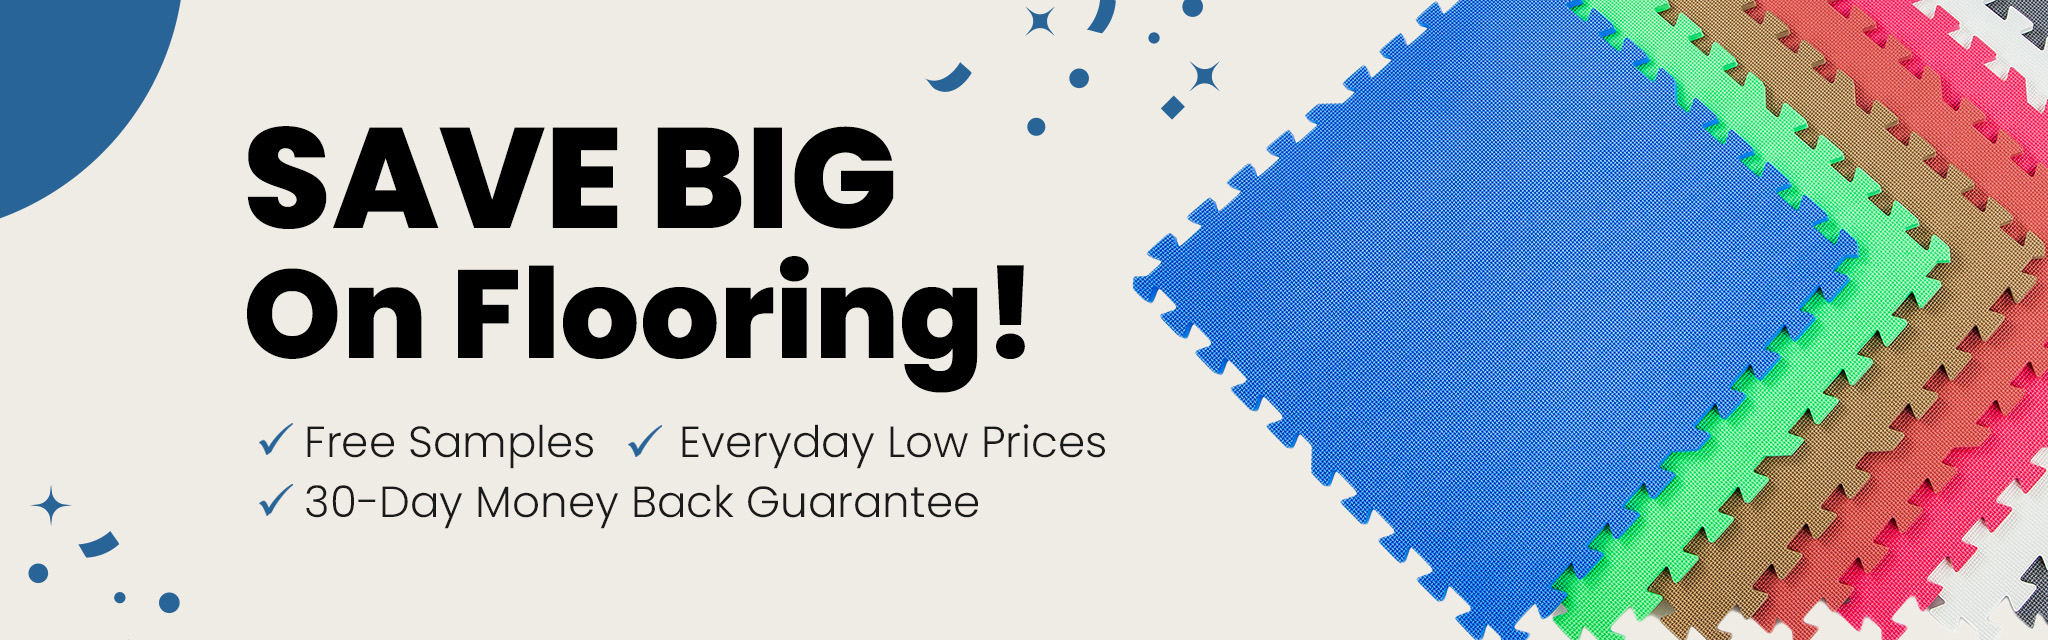 SABE BIG on Flooring! Free Samples, Everyday Low Prices, 30-Day Money Back Guarantee